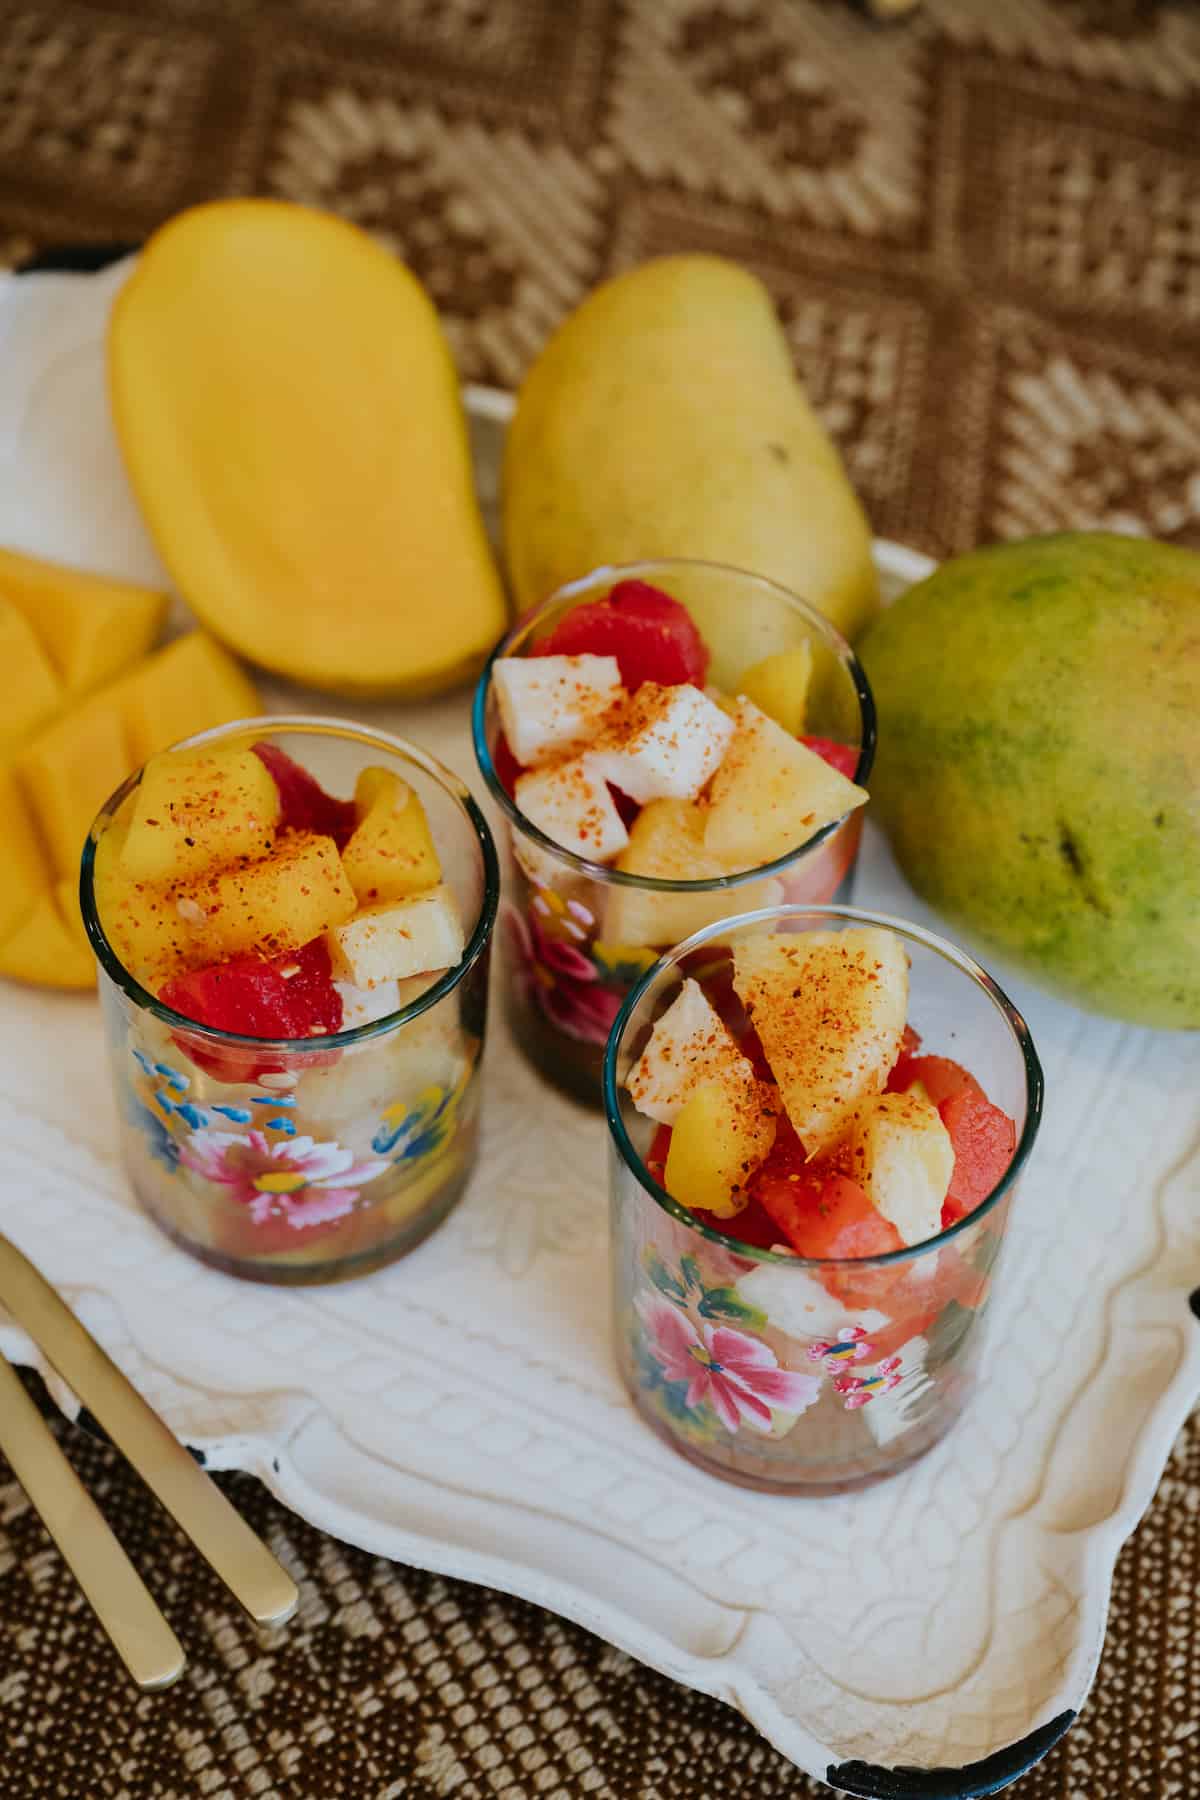 closeup shot of 3 hand-painted glasses filled with Mexican fruit salad and garnished with tajin seasoning. 